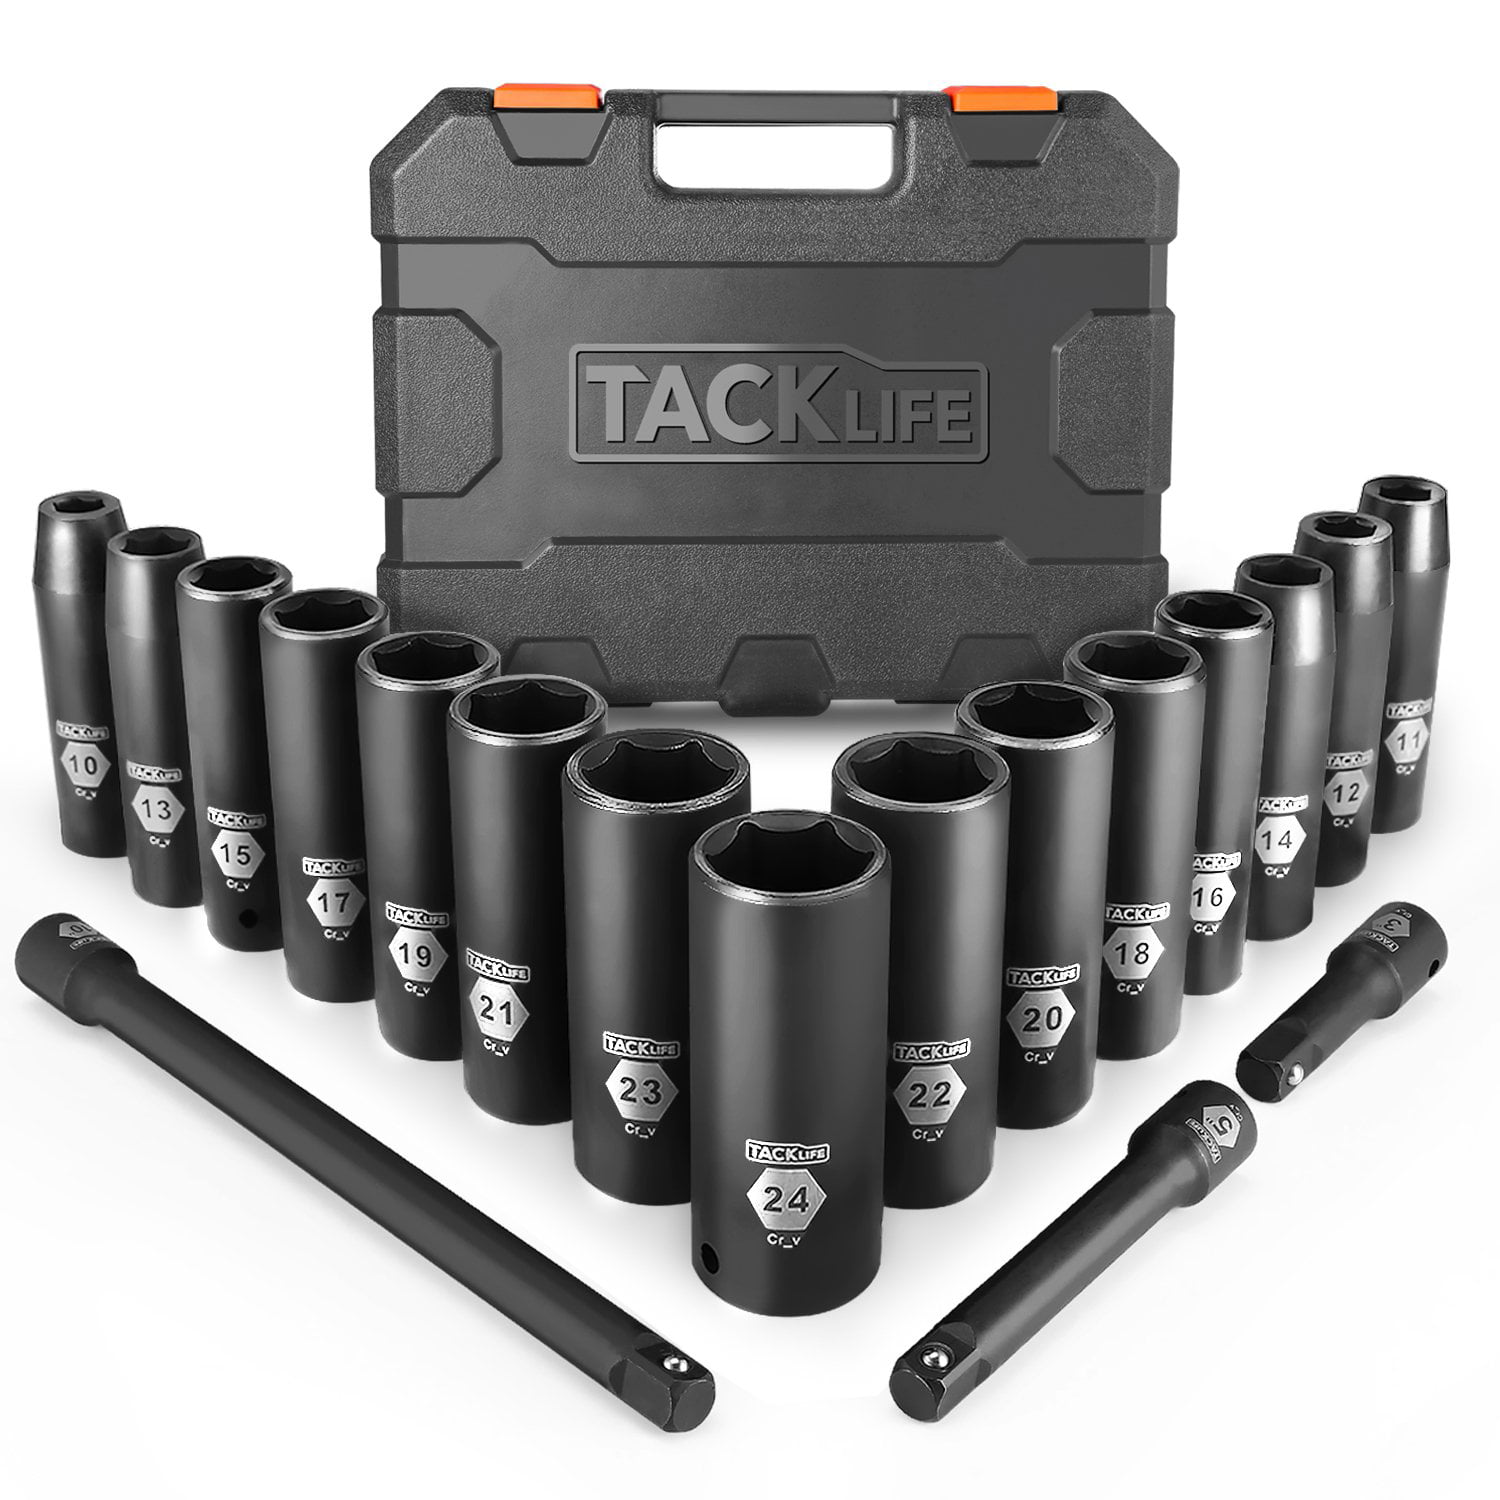 16Pc 1/2 Inch Deep Air Impact Drive Metric Industrial Wrench 10-32mm Socket Set